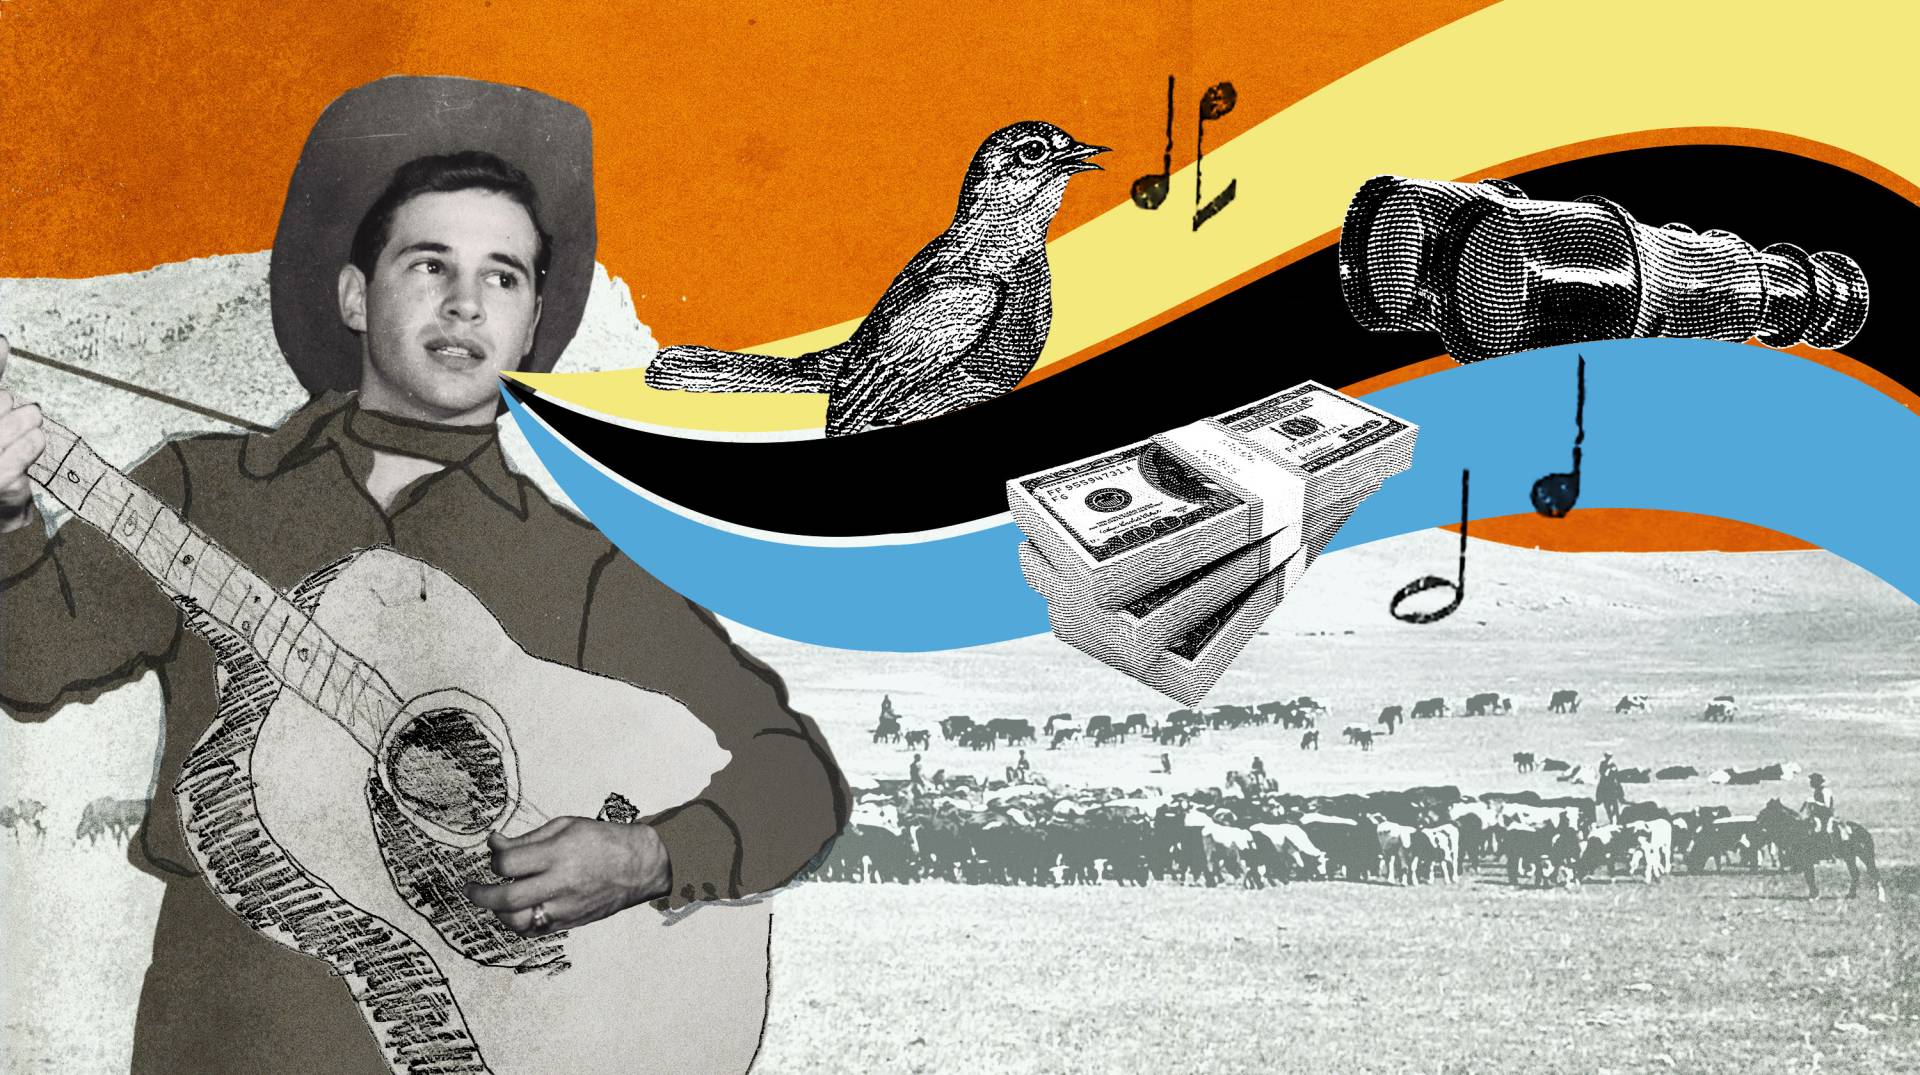 A man in a cowboy hat plays a guitar and sings a bird, a stack of money, and binoculars with a herd of cows in the background